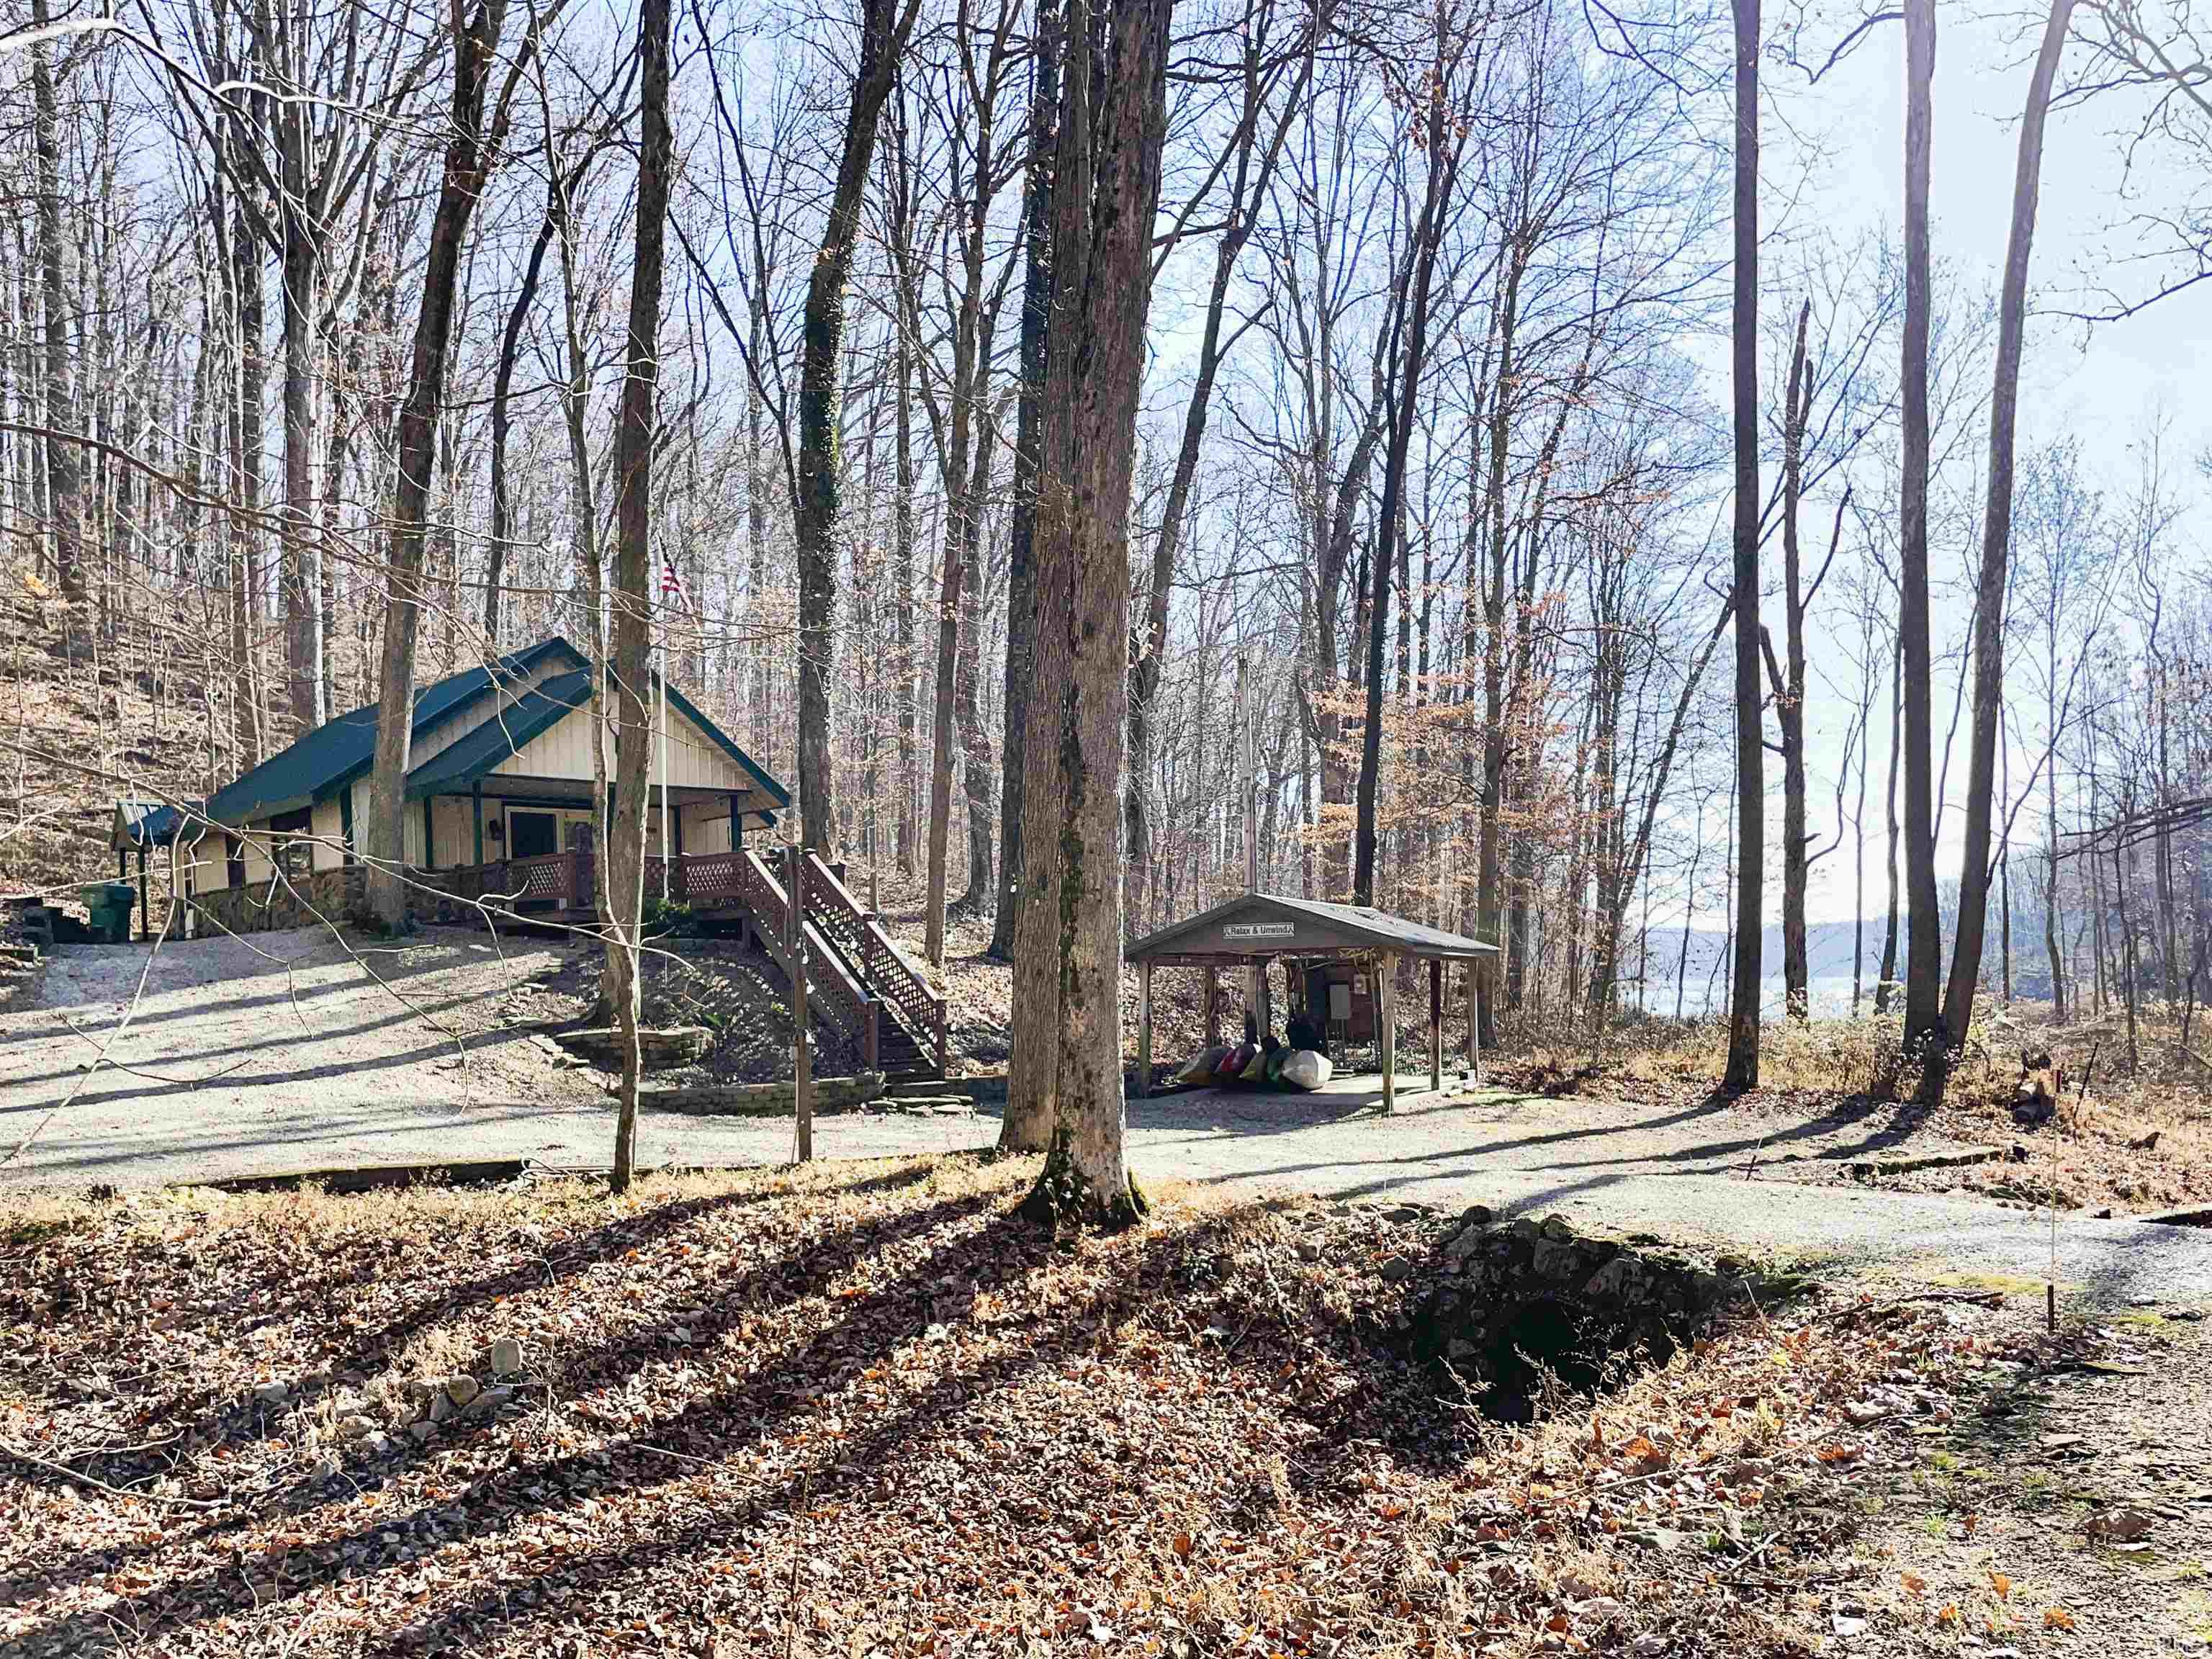 Prime Patoka Lake property with 9+ acres!  Enjoy year round fun at your own piece of paradise nestled in a secluded wooded valley with large mature trees, within eyesight of Patoka Lake and within a short walk to the shore.  Cabin provides all the conveniences of home and offers a cathedral ceiling entry, 2 Bedrooms + 2 additional sleeping quarters in the large loft, 1 full Bathroom, walk-in cedar closet, new HVAC installed in 2020, and laundry facilities included.  There's a large deck for entertaining, 12'x20' covered boat shed, 24'x30' insulated pole building with wood stove and window AC, and a newer 22'x30' metal boat storage shed. This is an outdoorsman's dream with with a fish cleaning station, permanent deer blind, deer hoist, 2 deer stands, and a established food plot all included.  Property is bordered by federal land which is able to be hunted.  Jackson boat ramp is just 10 min away.